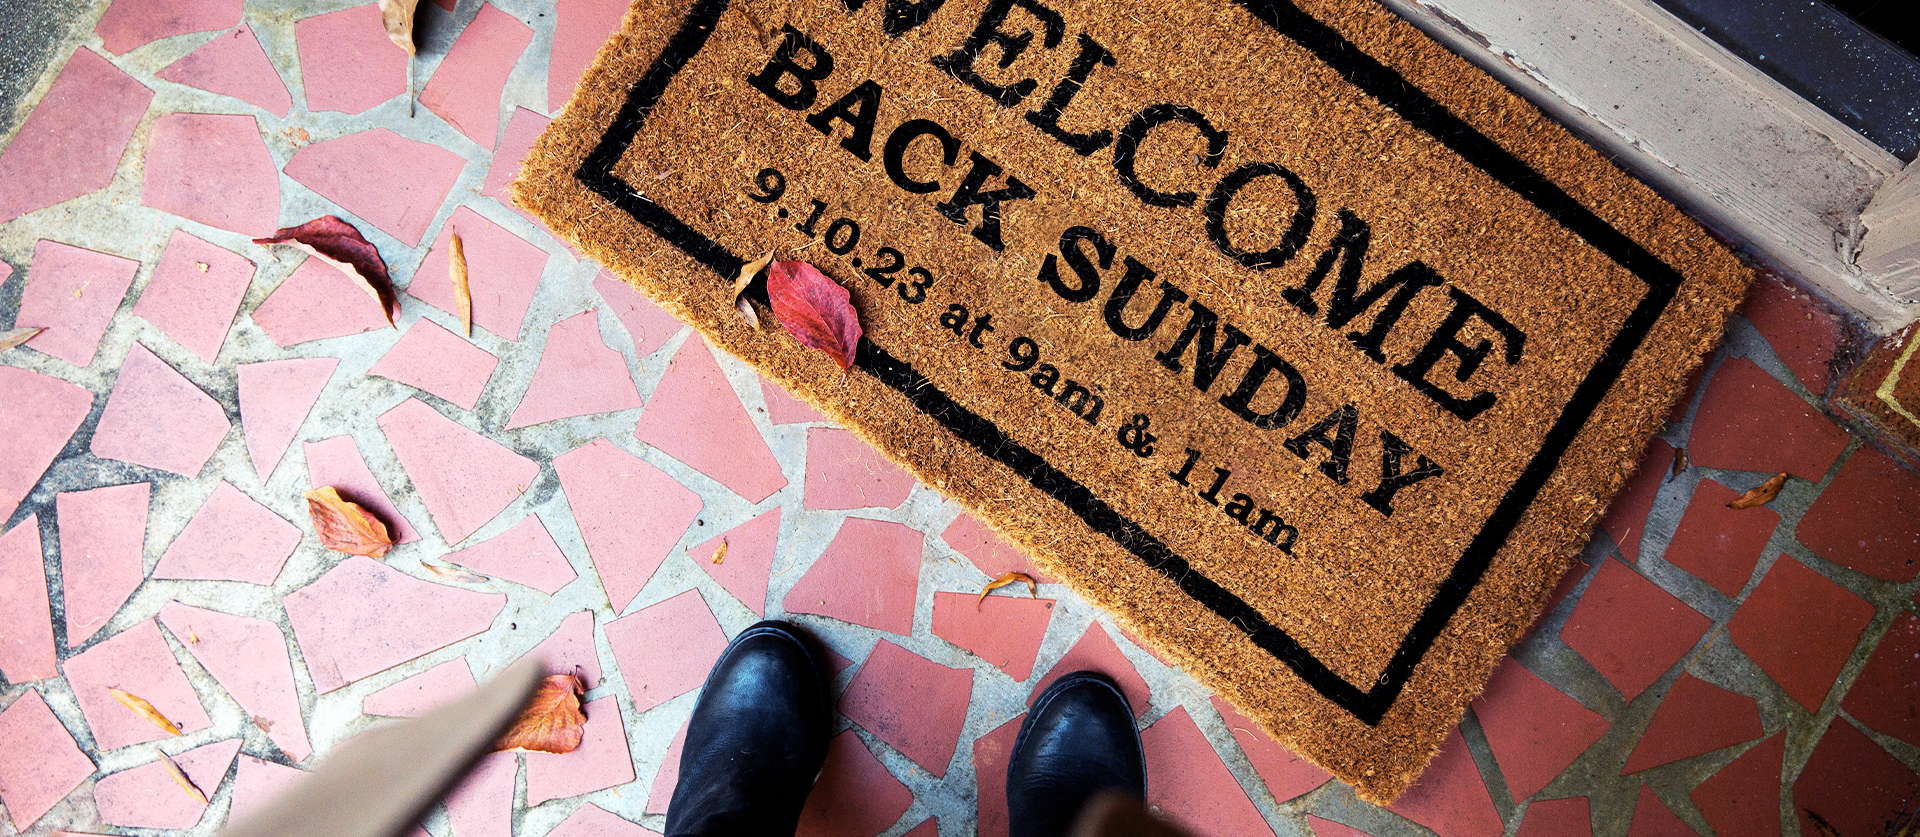 Welcome Back Sunday: September 10 at 9am & 11am